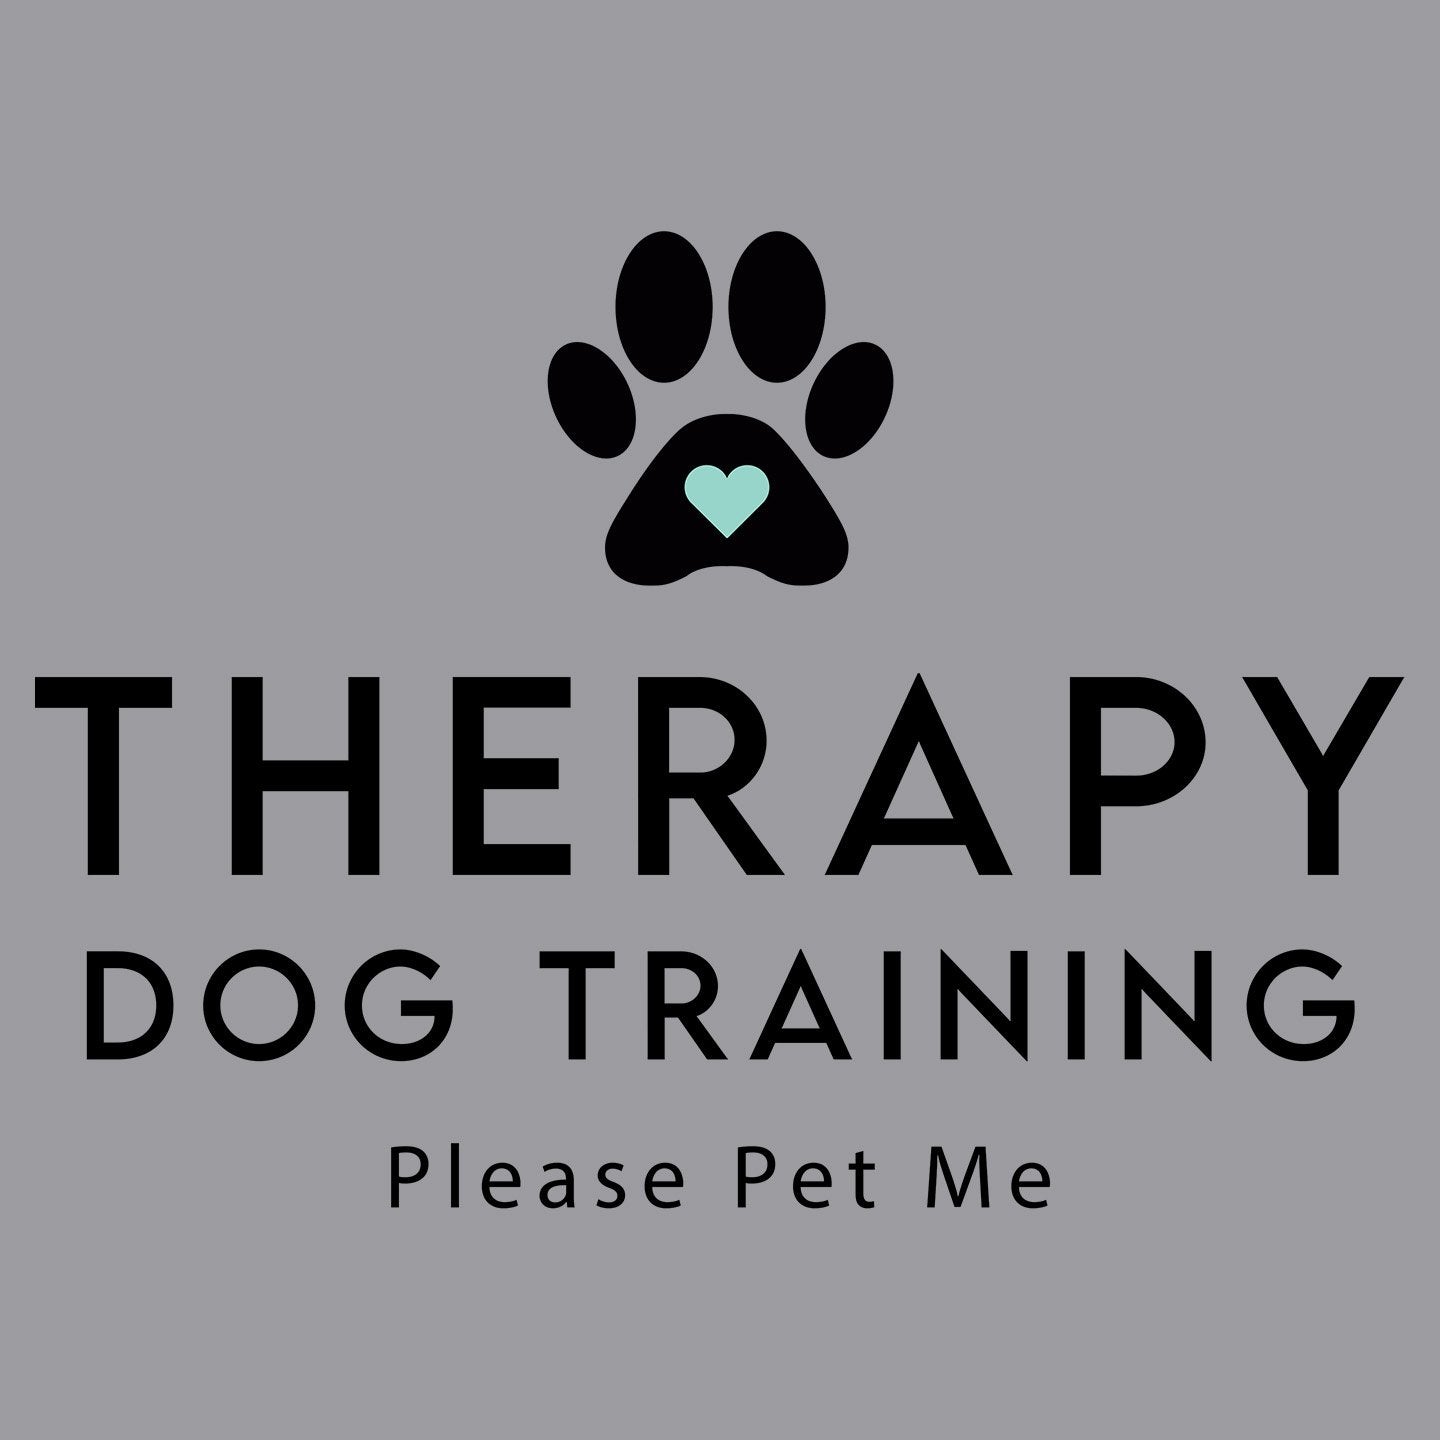 Therapy Dog Training - Adult Tri-Blend T-Shirt